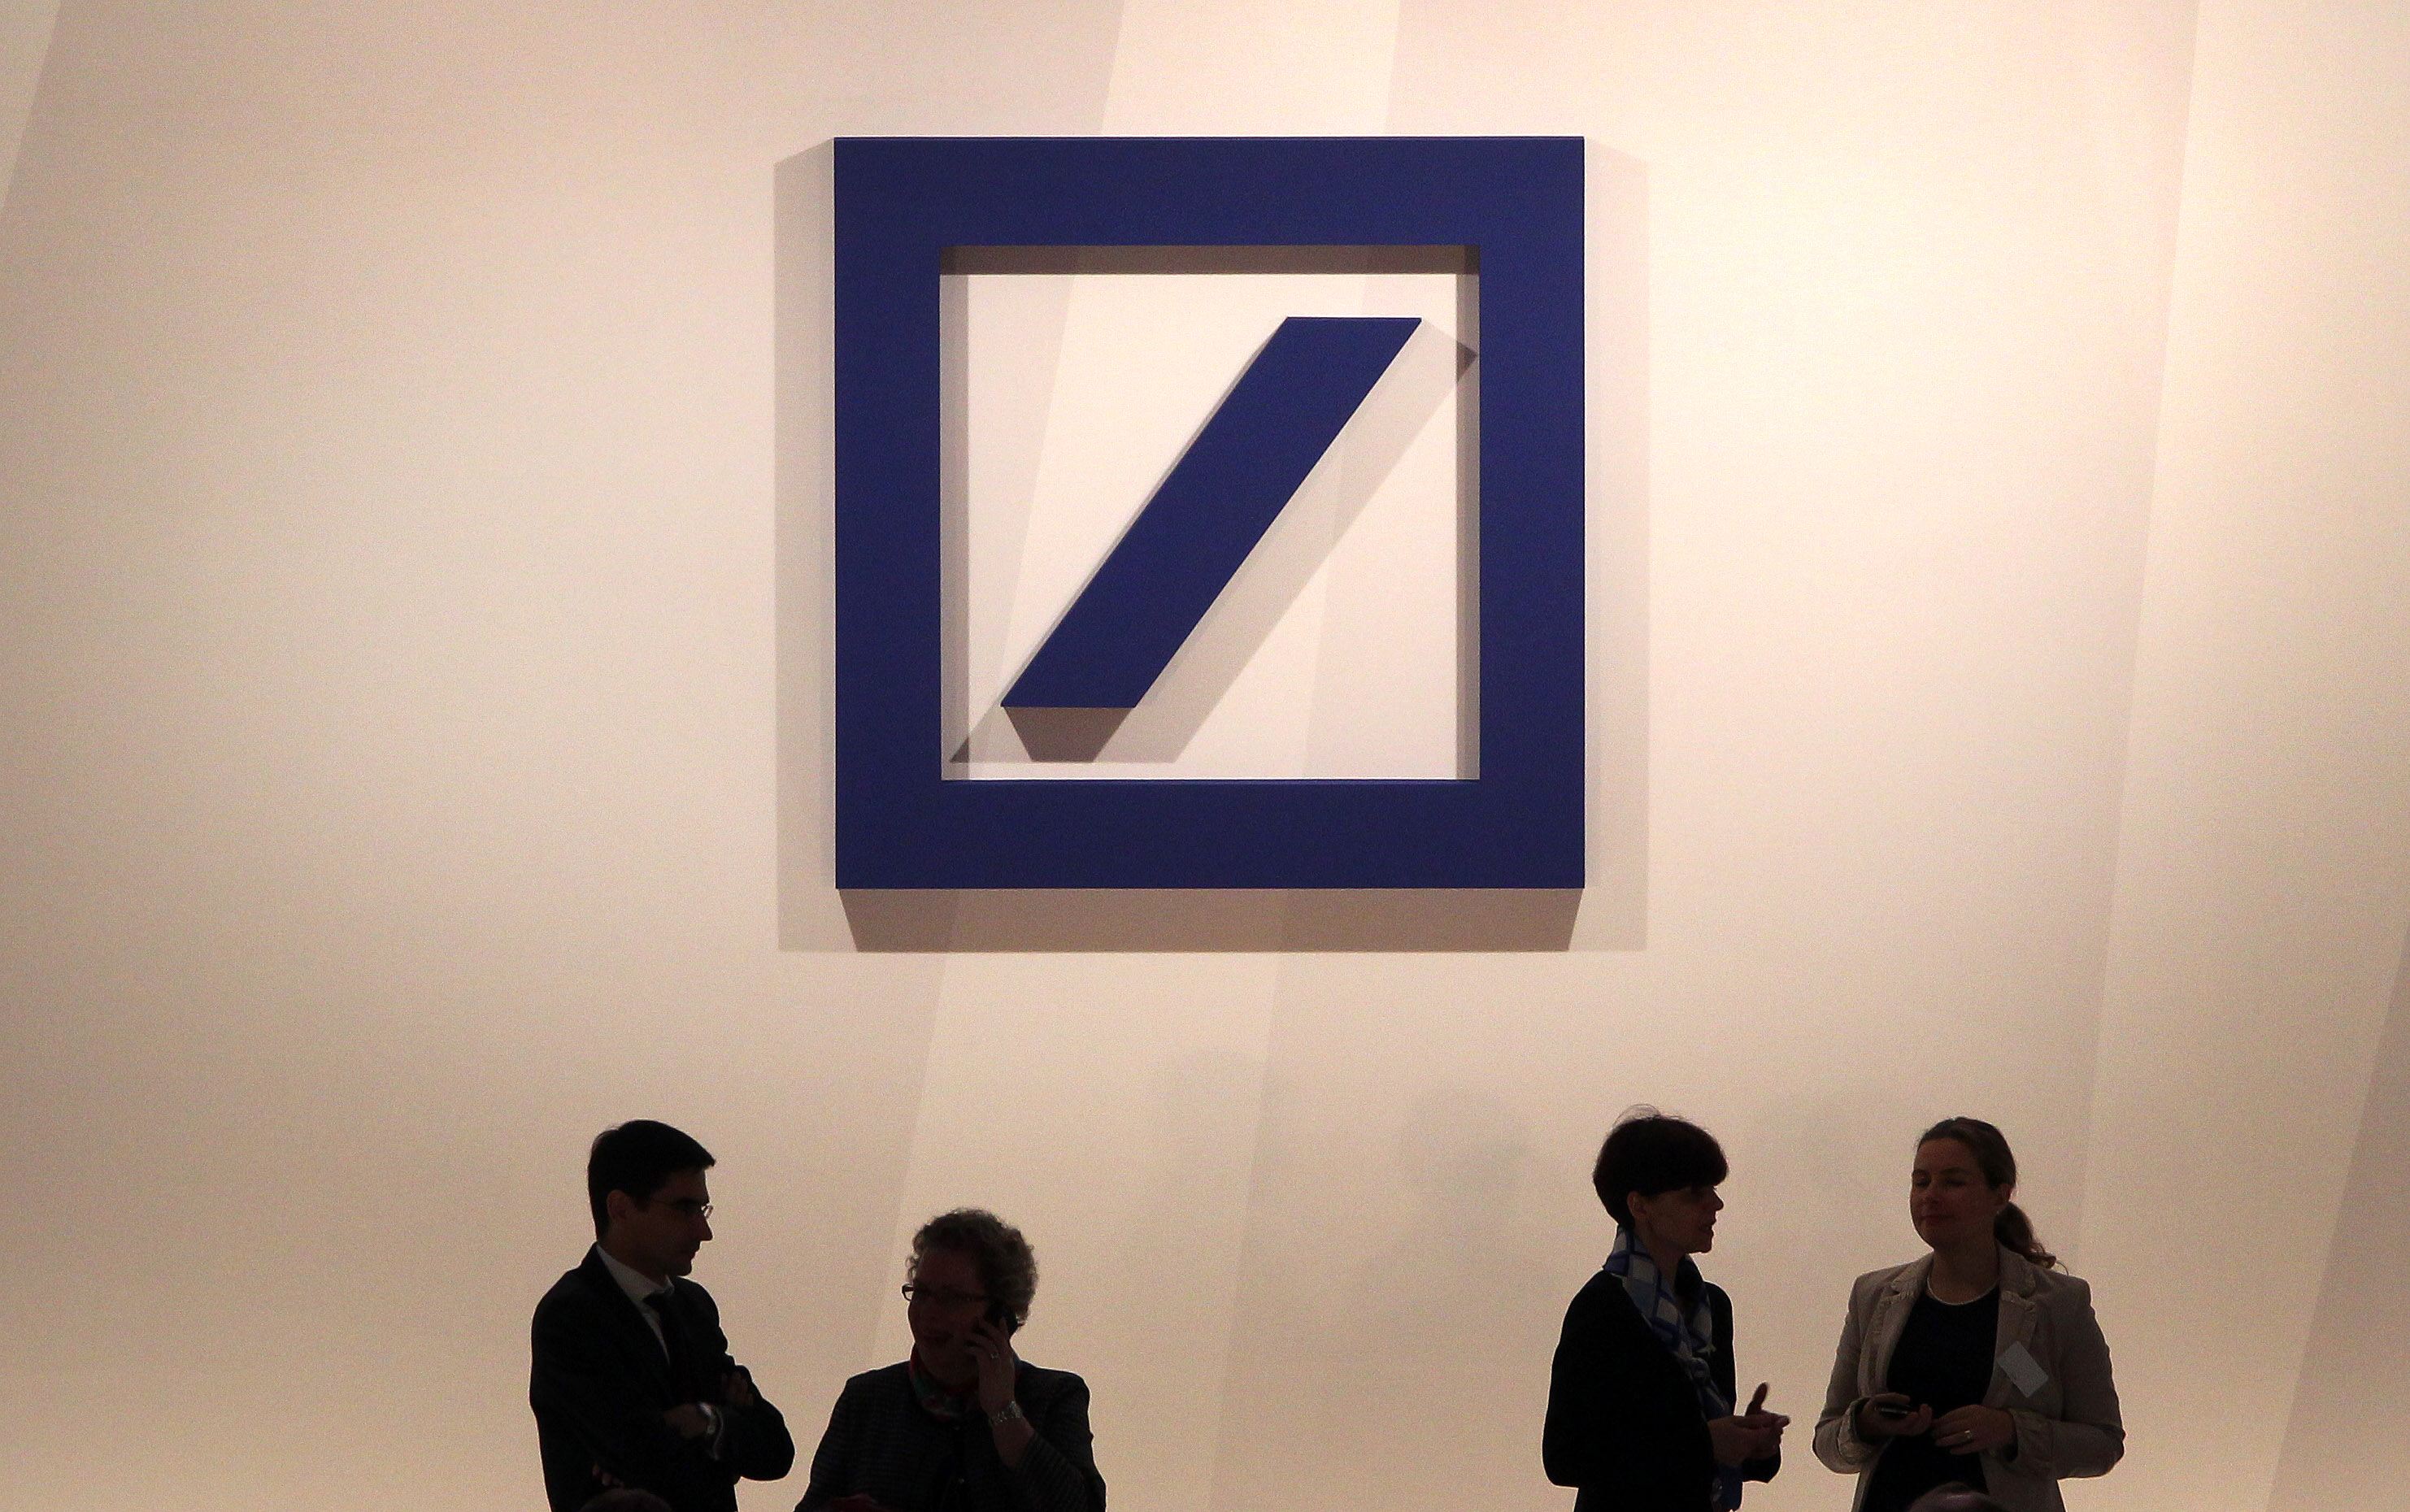 BERLIN, Germany (AFP) — Deutsche Bank announced Thursday plans to...